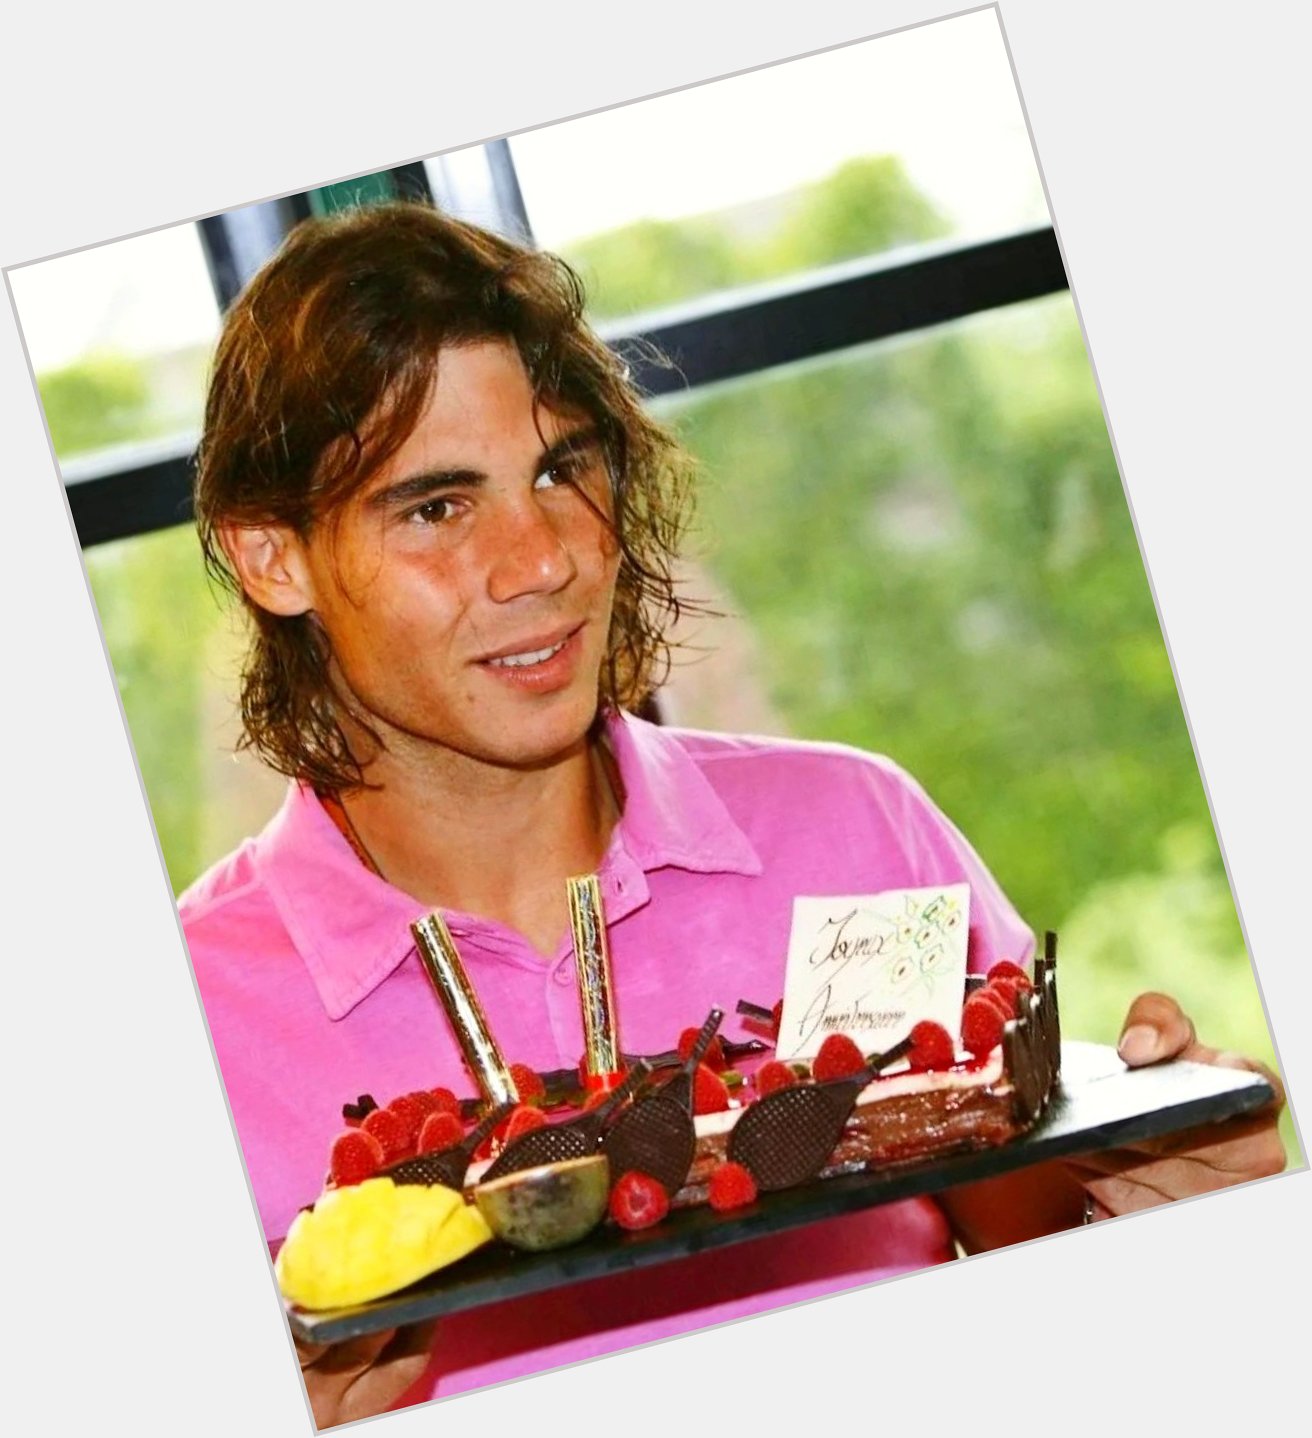 Happy birthday to my bb Rafael Nadal ty for being you hope you have the bestest day and year rafa 